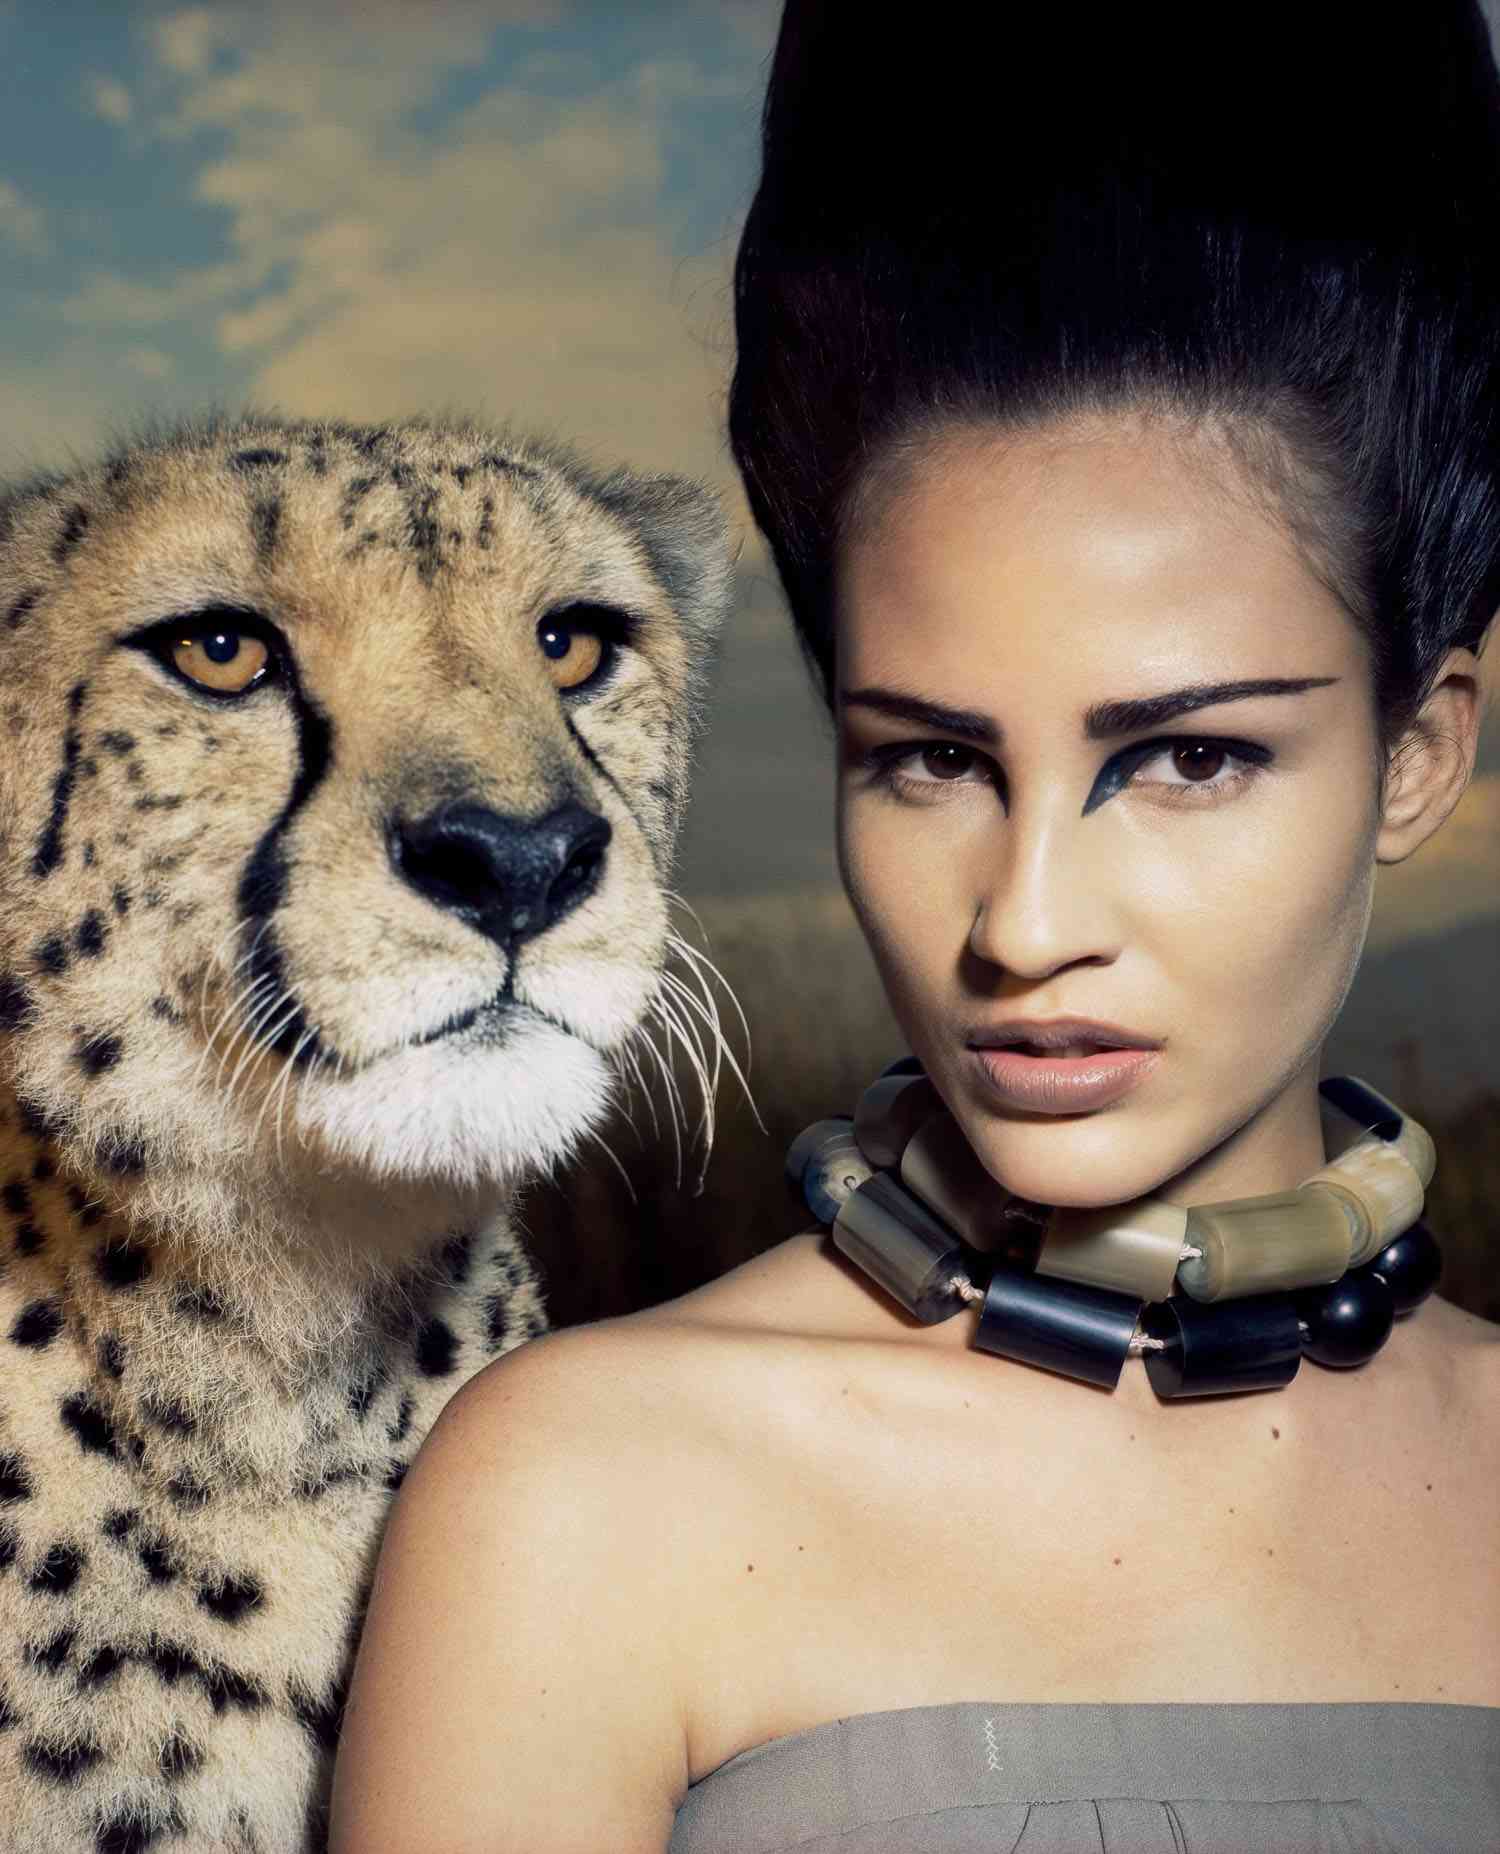 Check out some iconic editorial portrait samples in the Saint Studio, Cheetah Print.